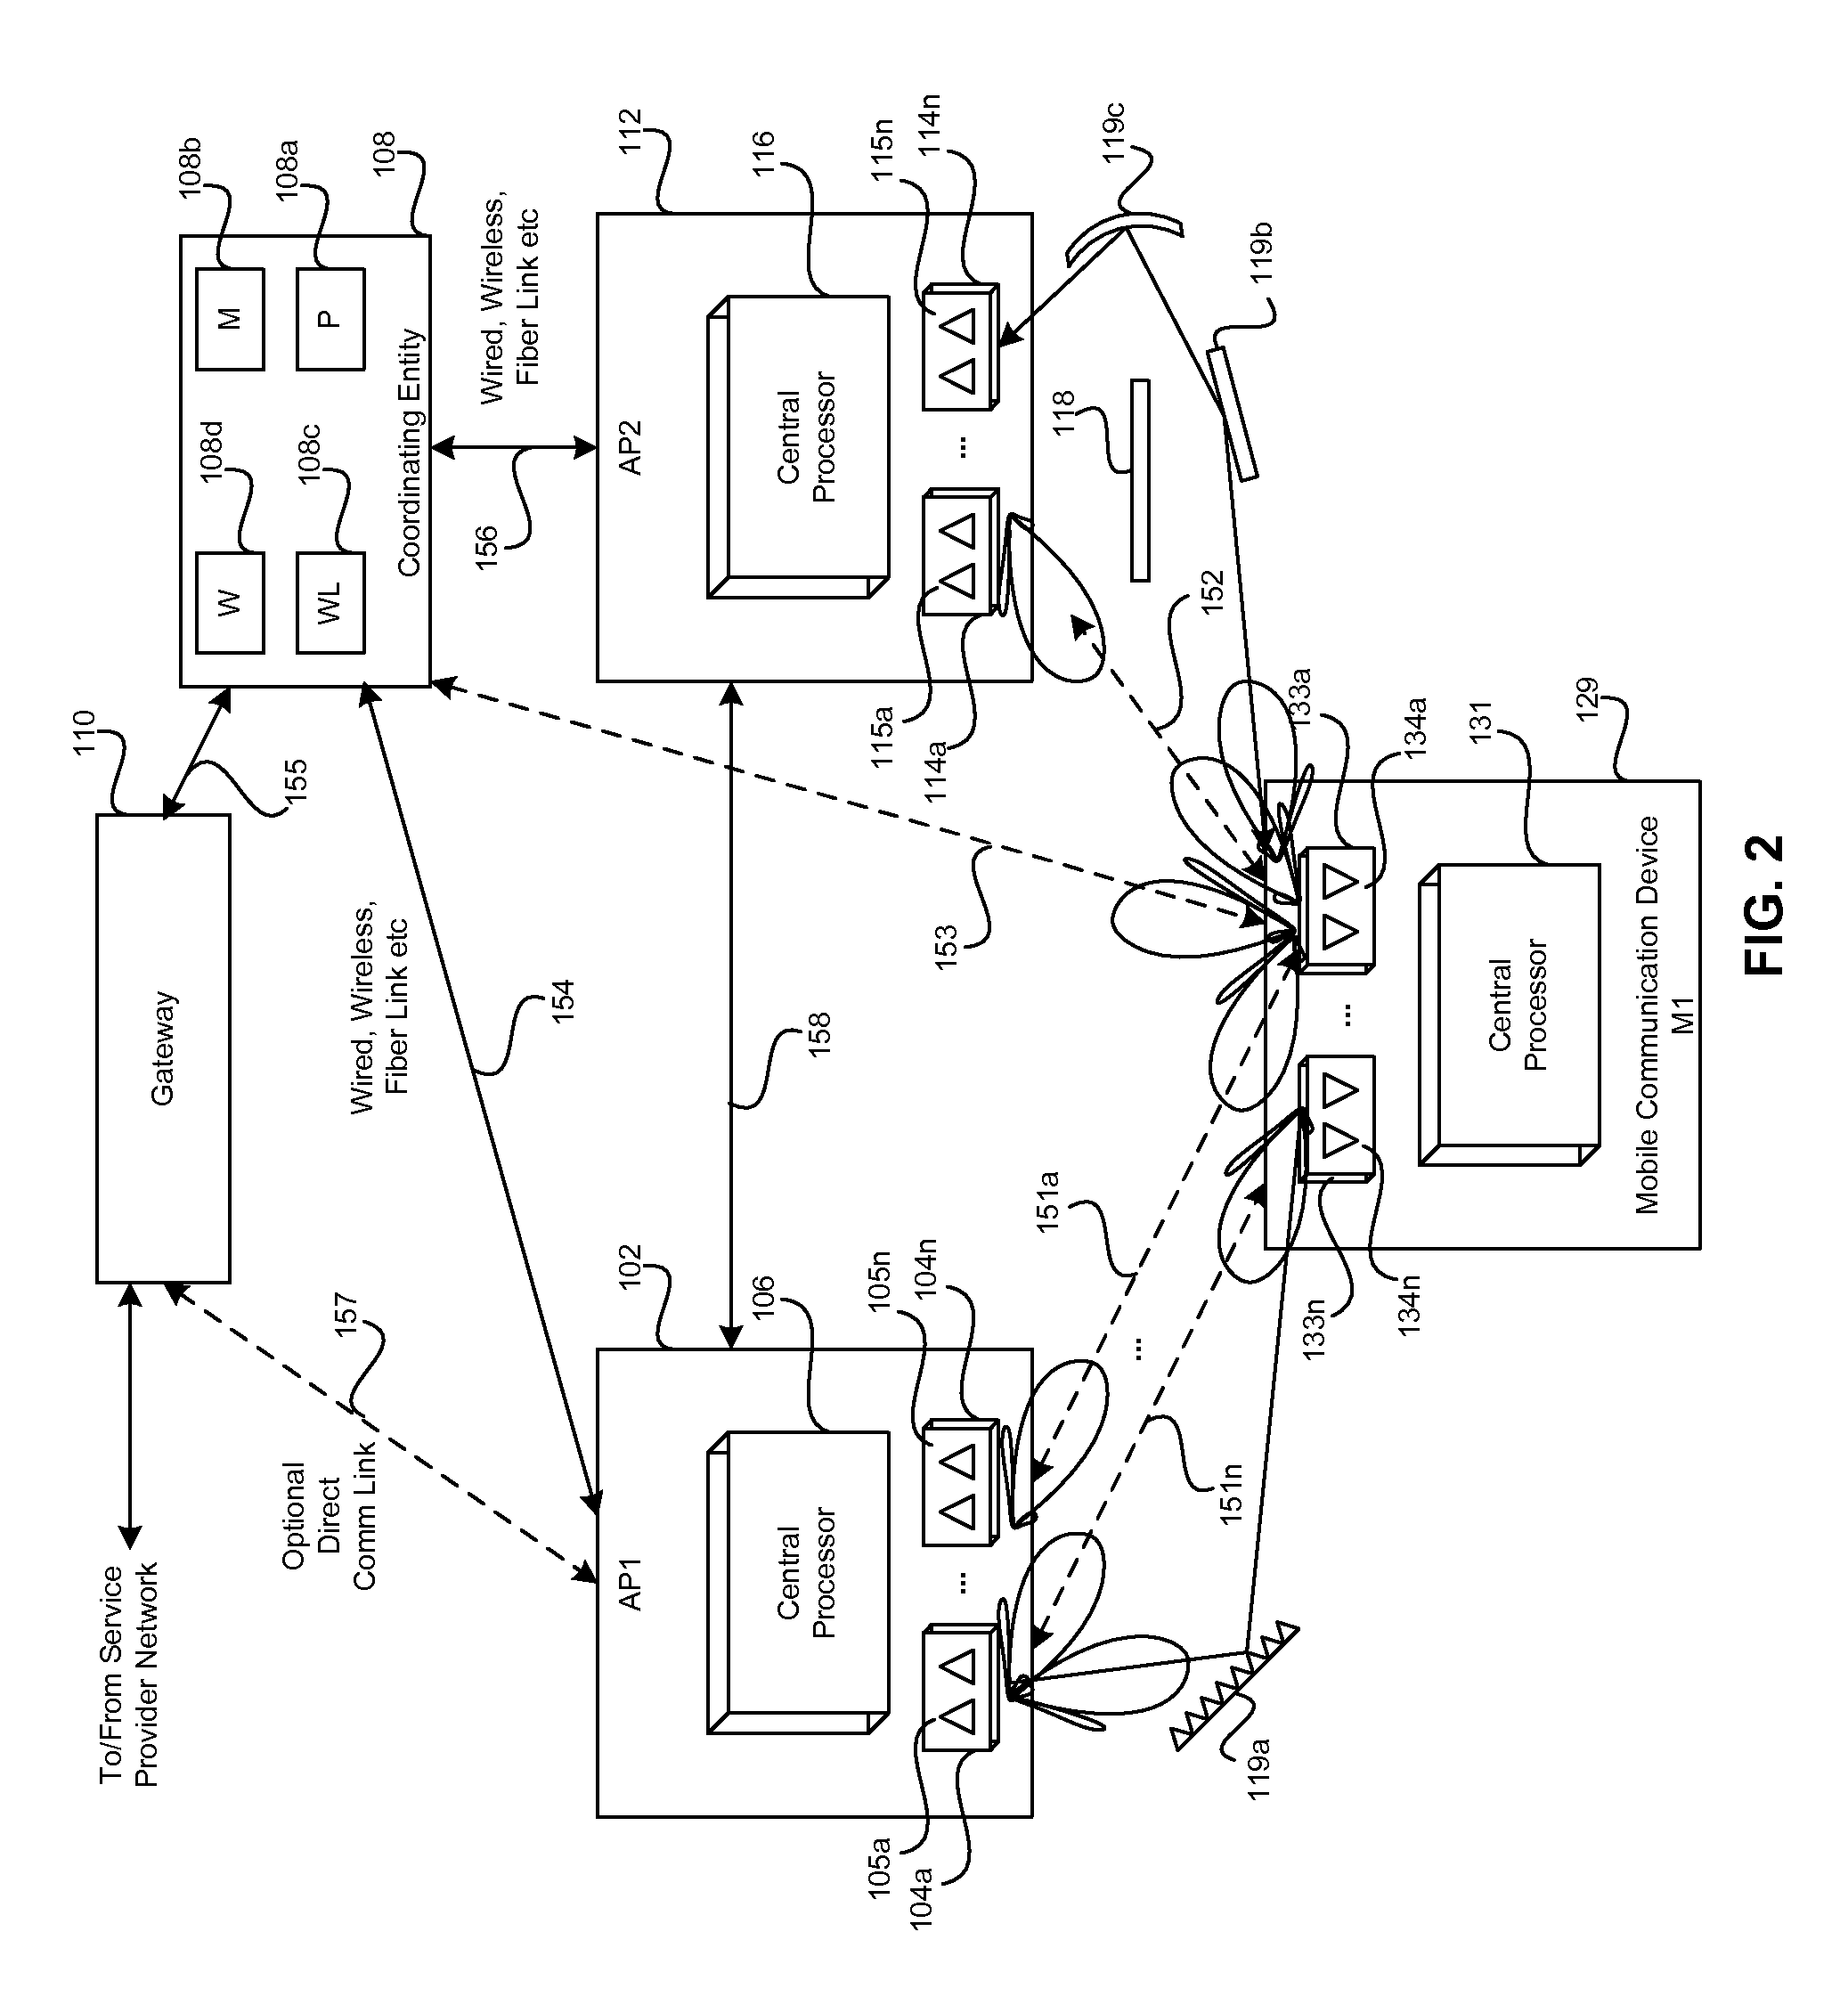 Method and system for a distributed configurable transceiver architecture and implementation